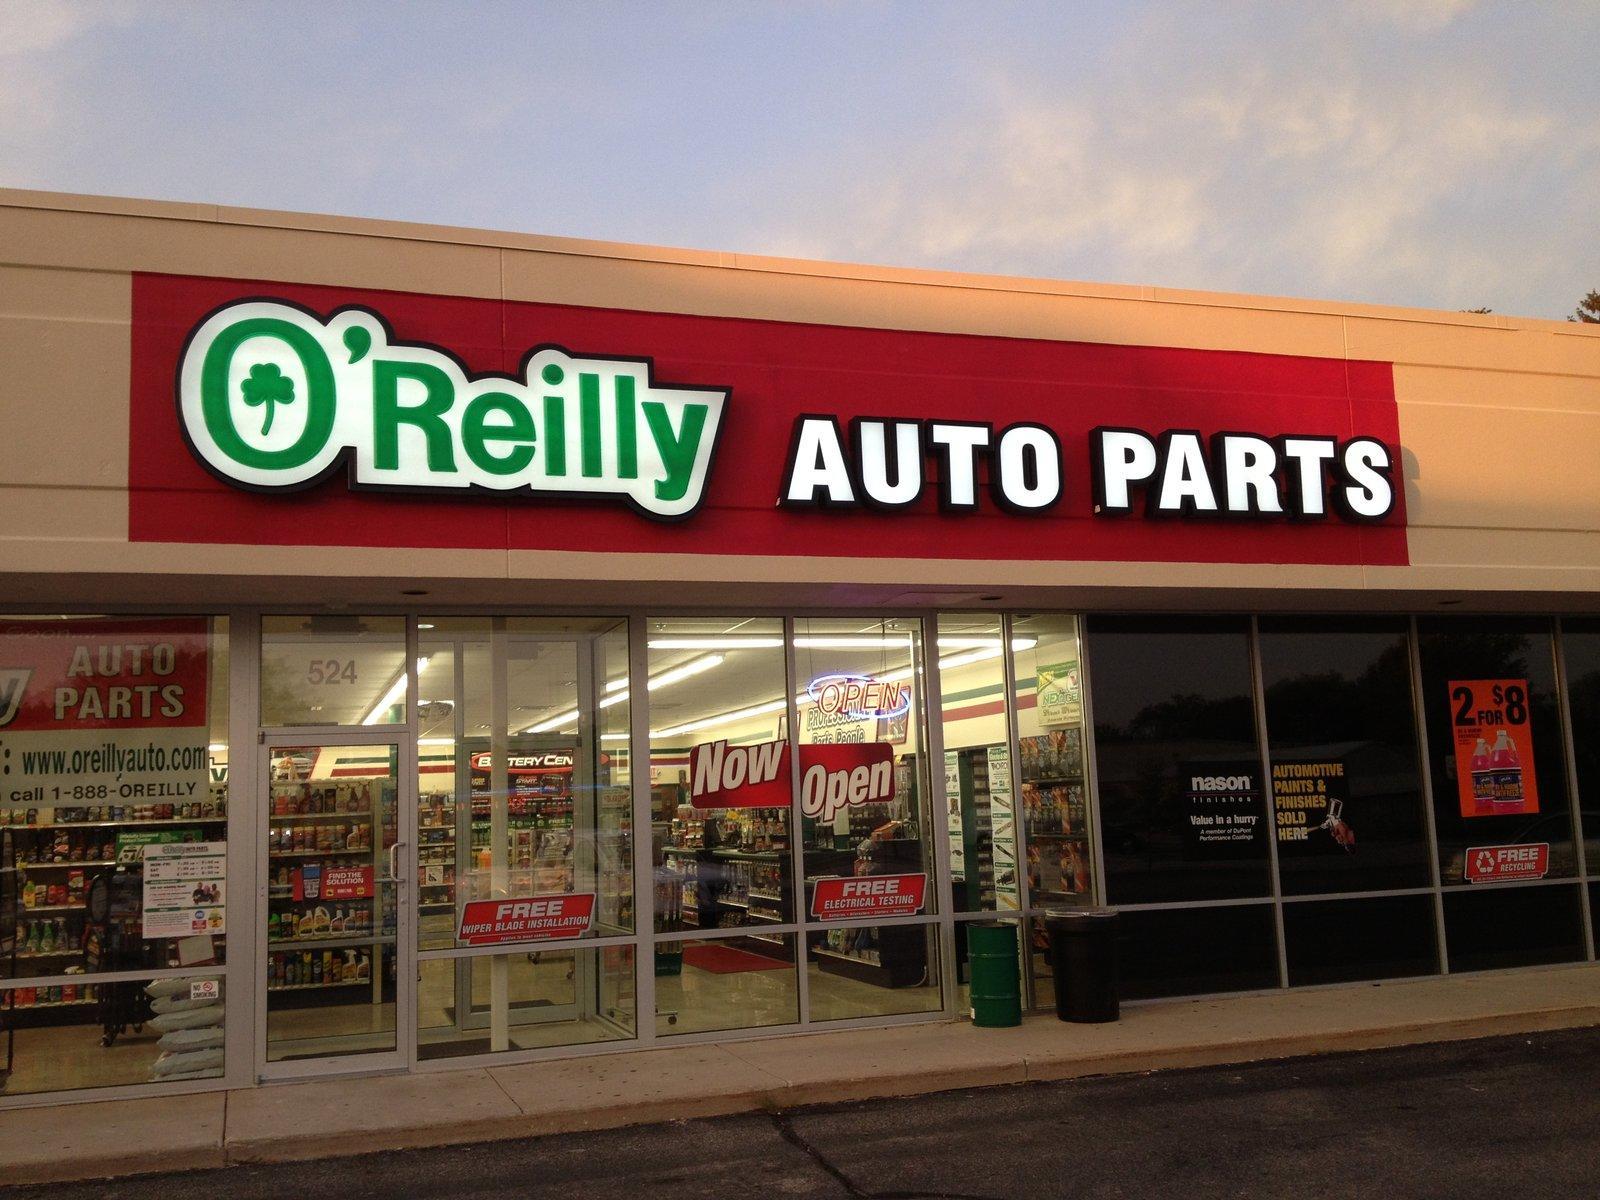 O'Reilly Auto Parts Coupons near me in Oconomowoc | 8coupons